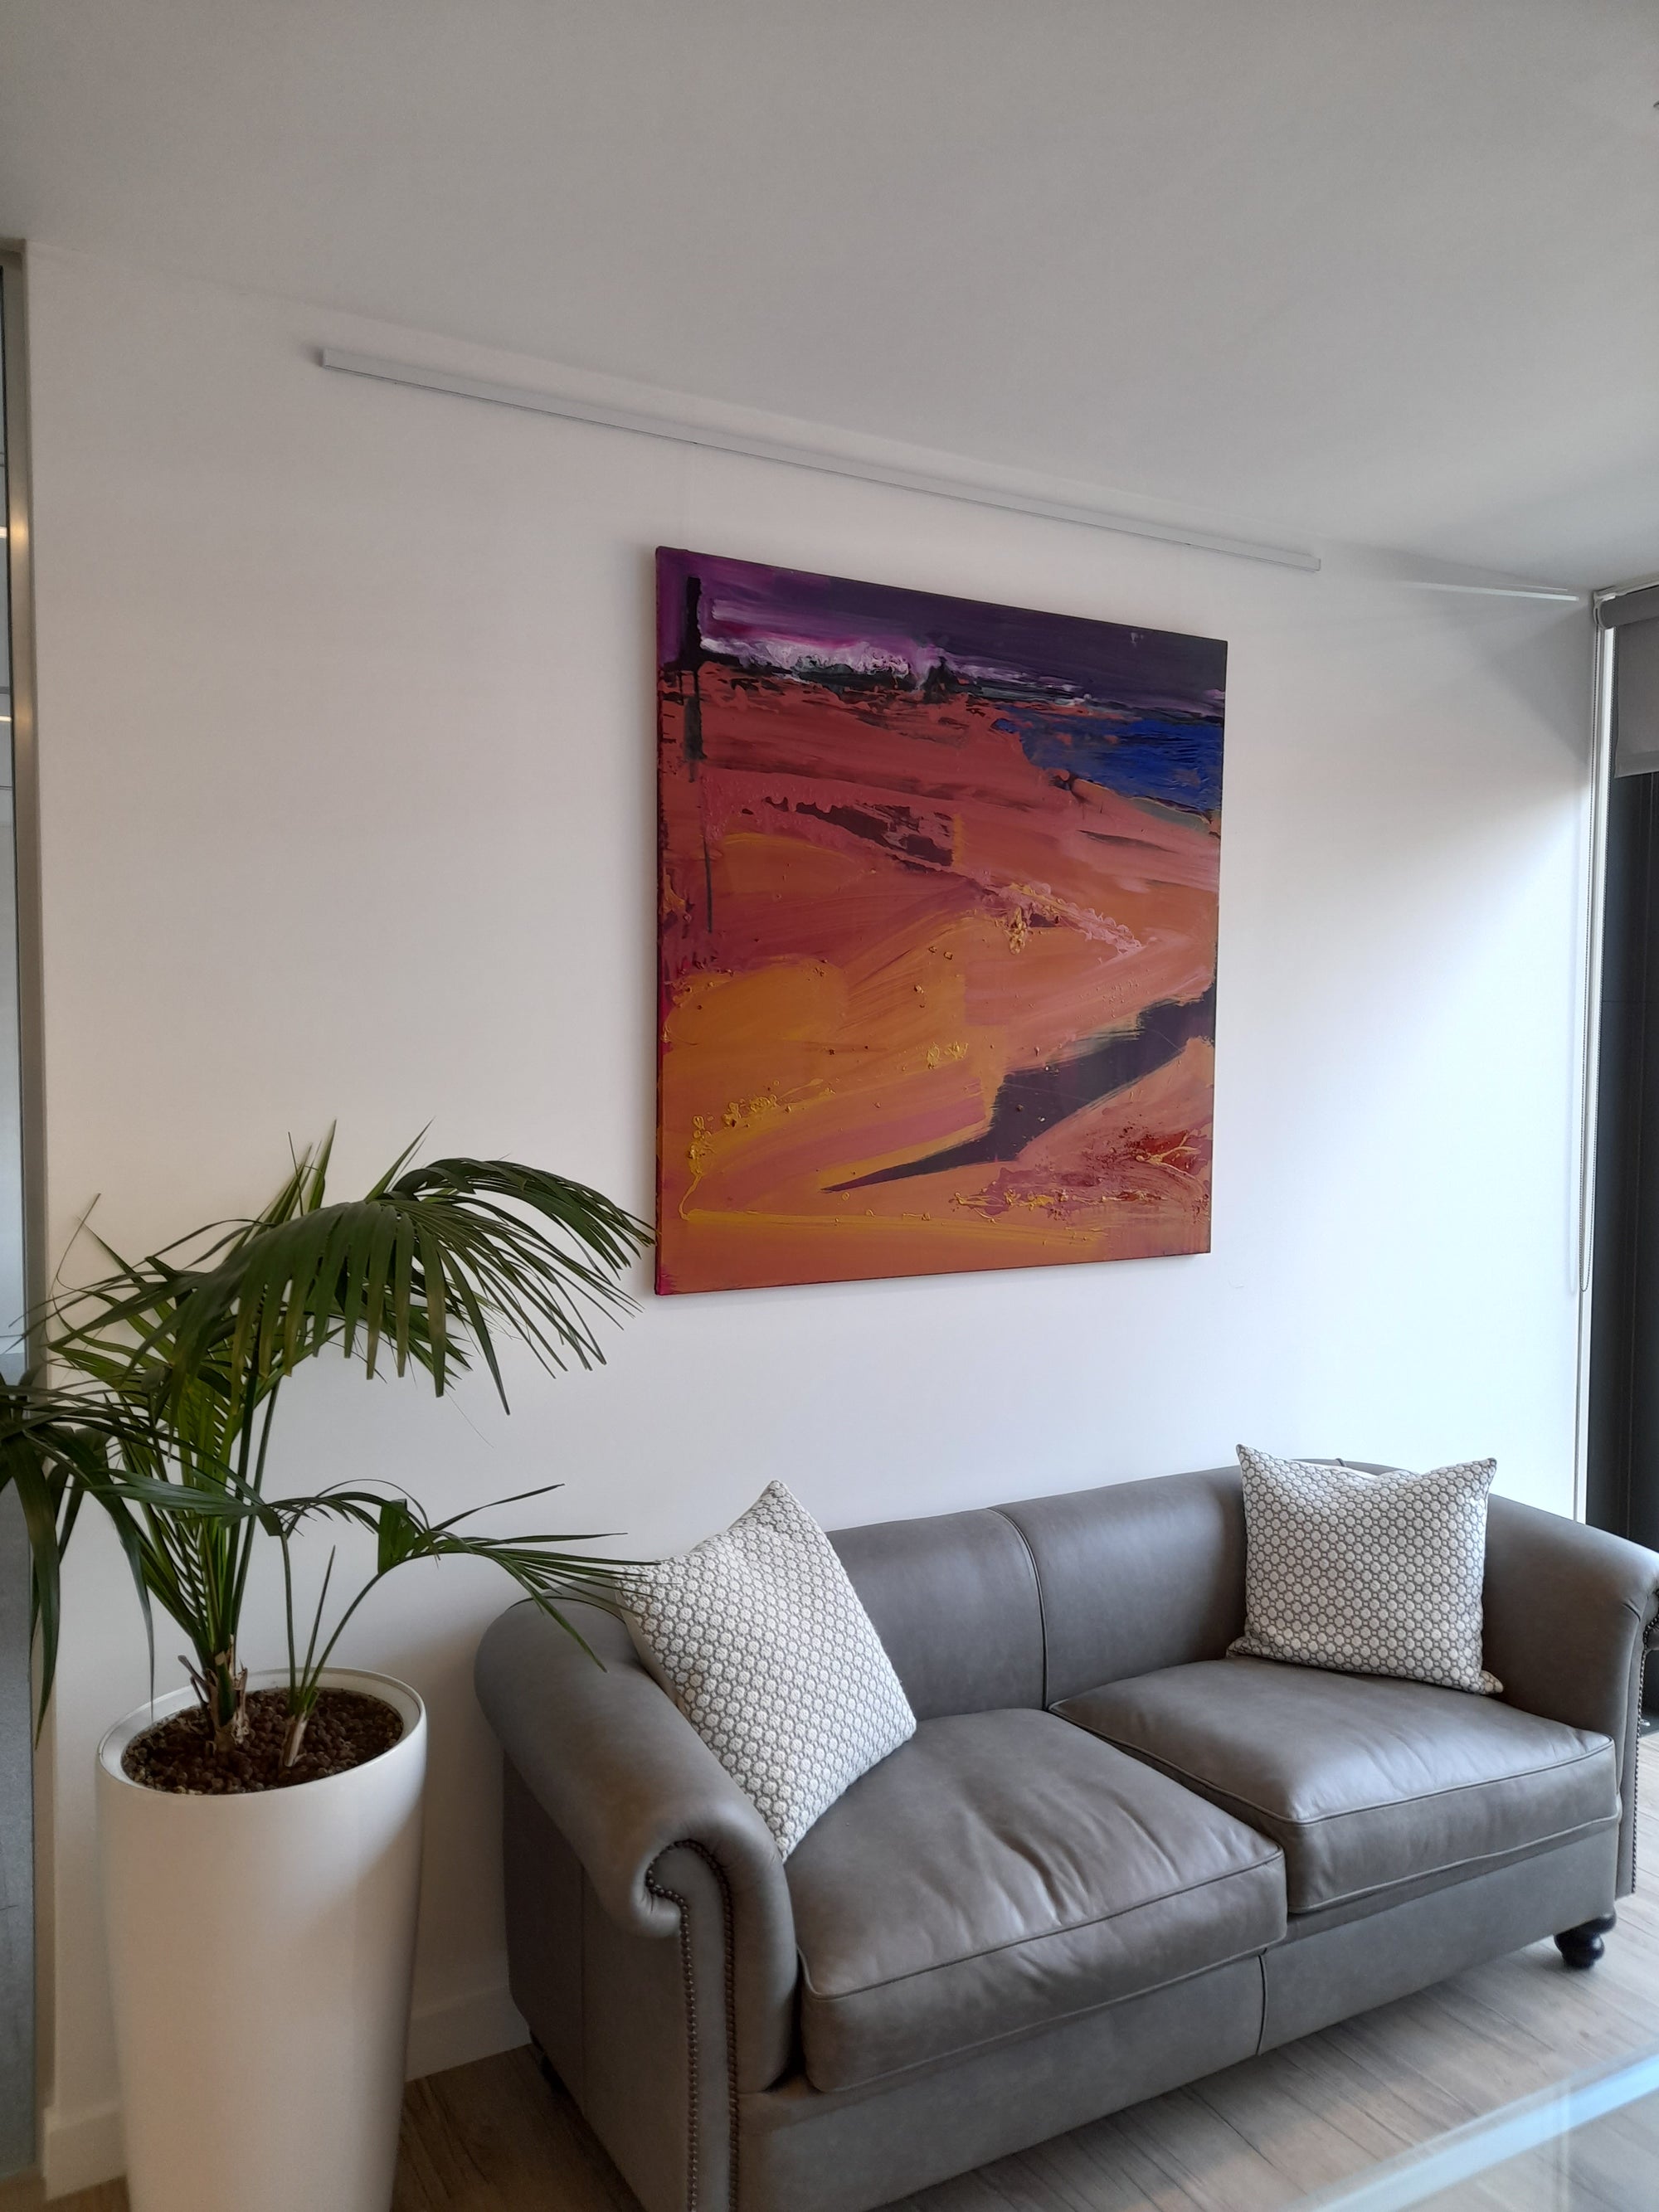 Office art and picture hanging rails for international investment firm in Soho, London